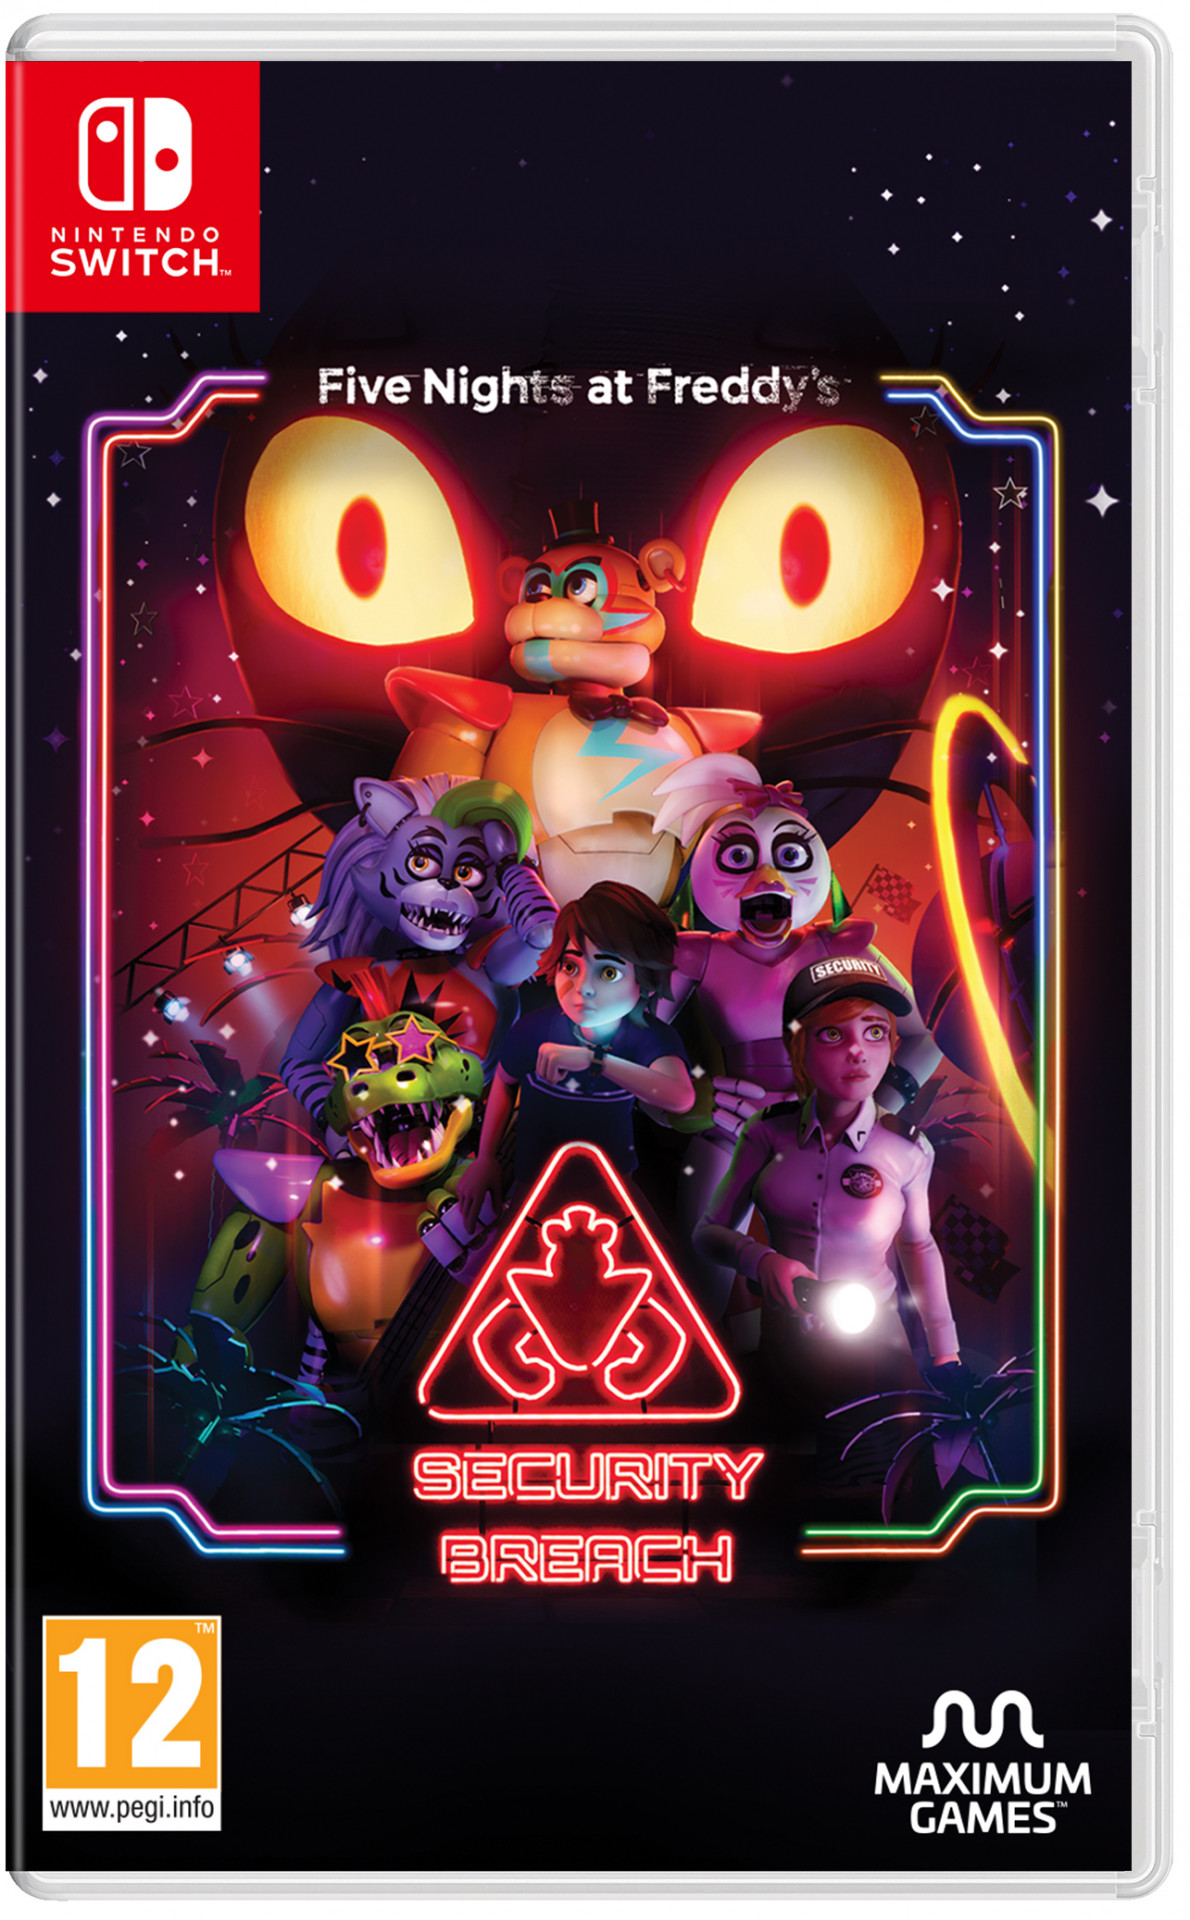 Five Nights At Freddy's Security Breach (Switch), Maximum Games